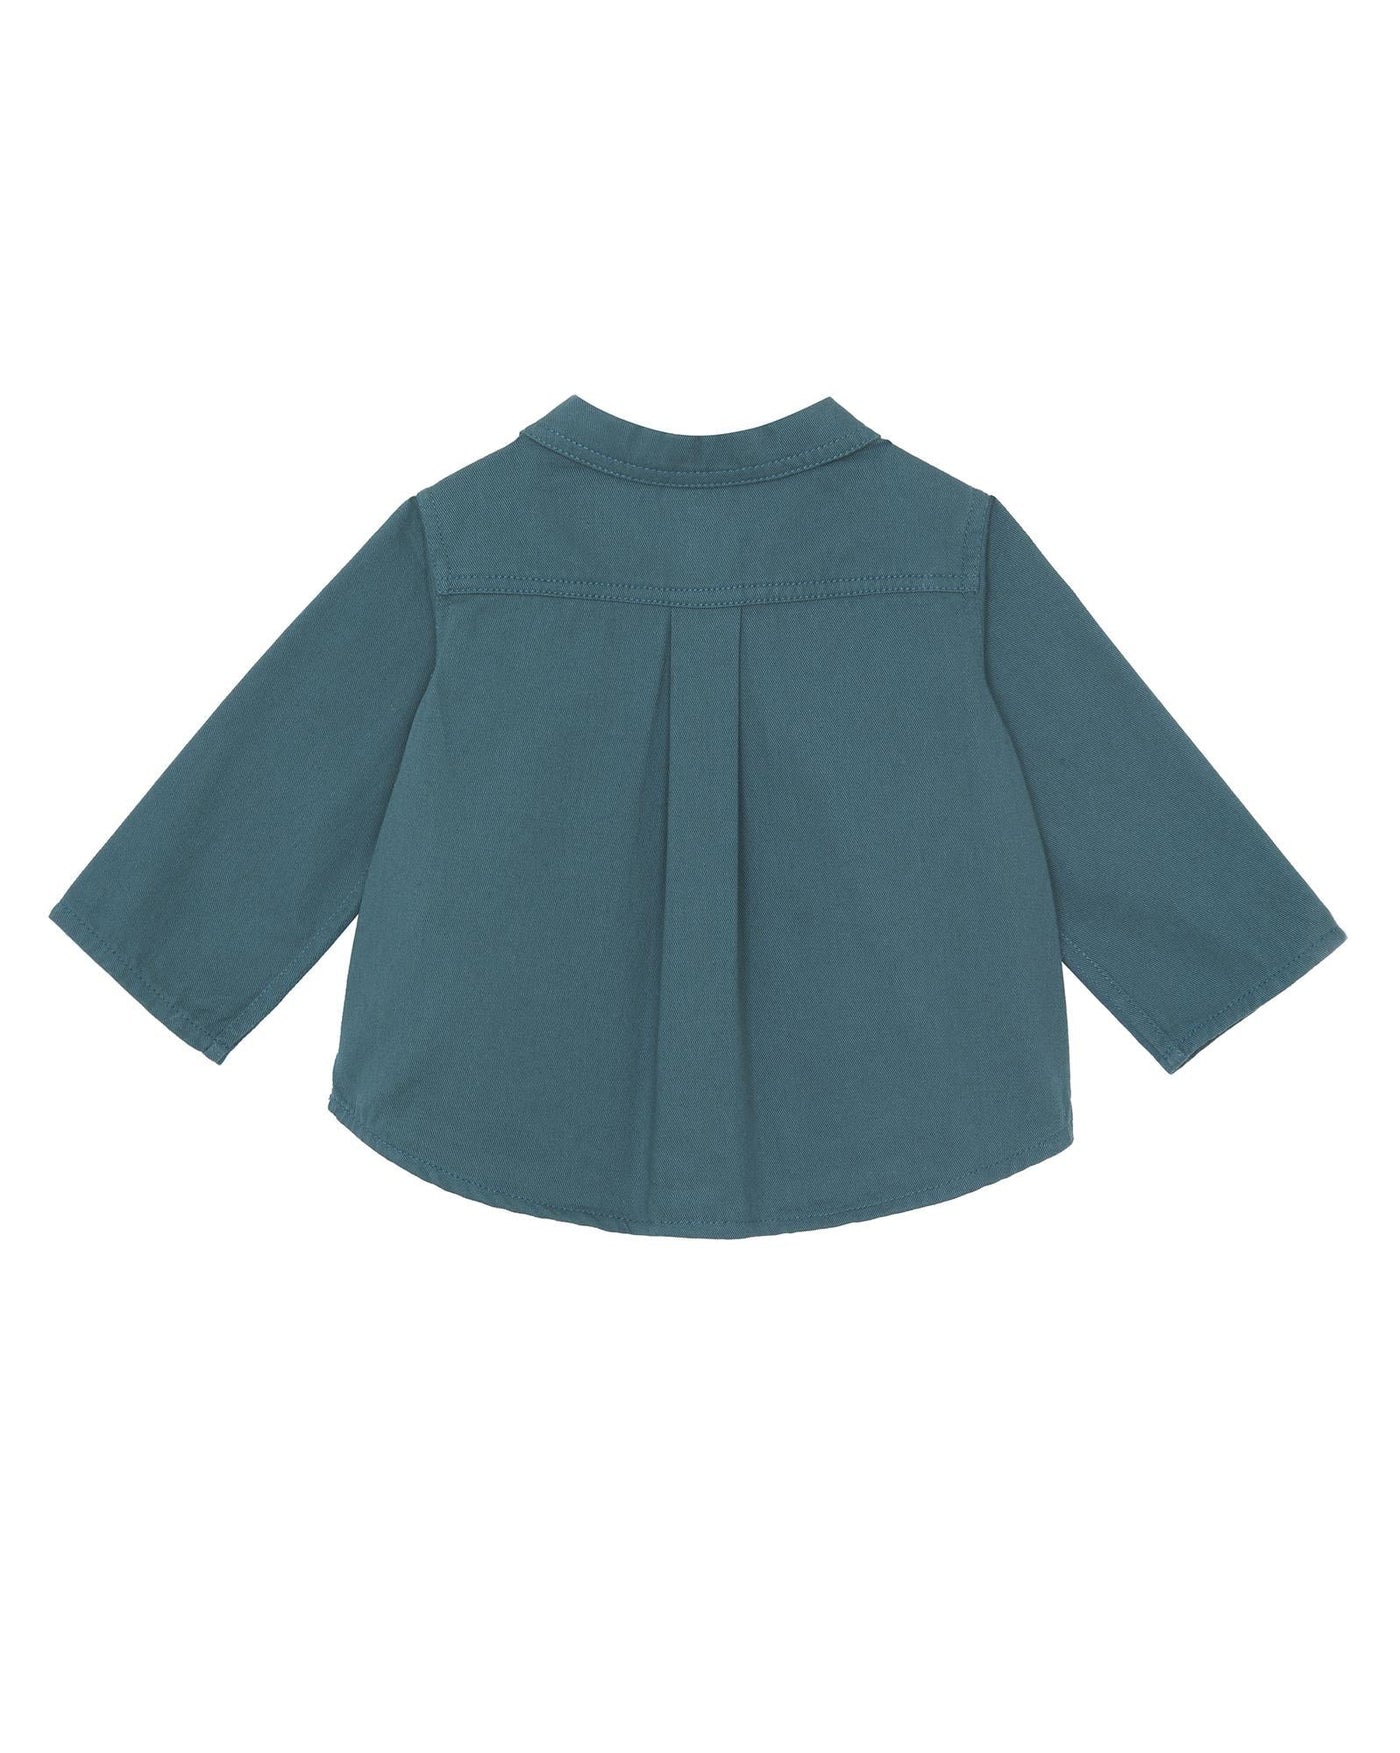 Brushed Cotton Twill Baby Shirt in River Green